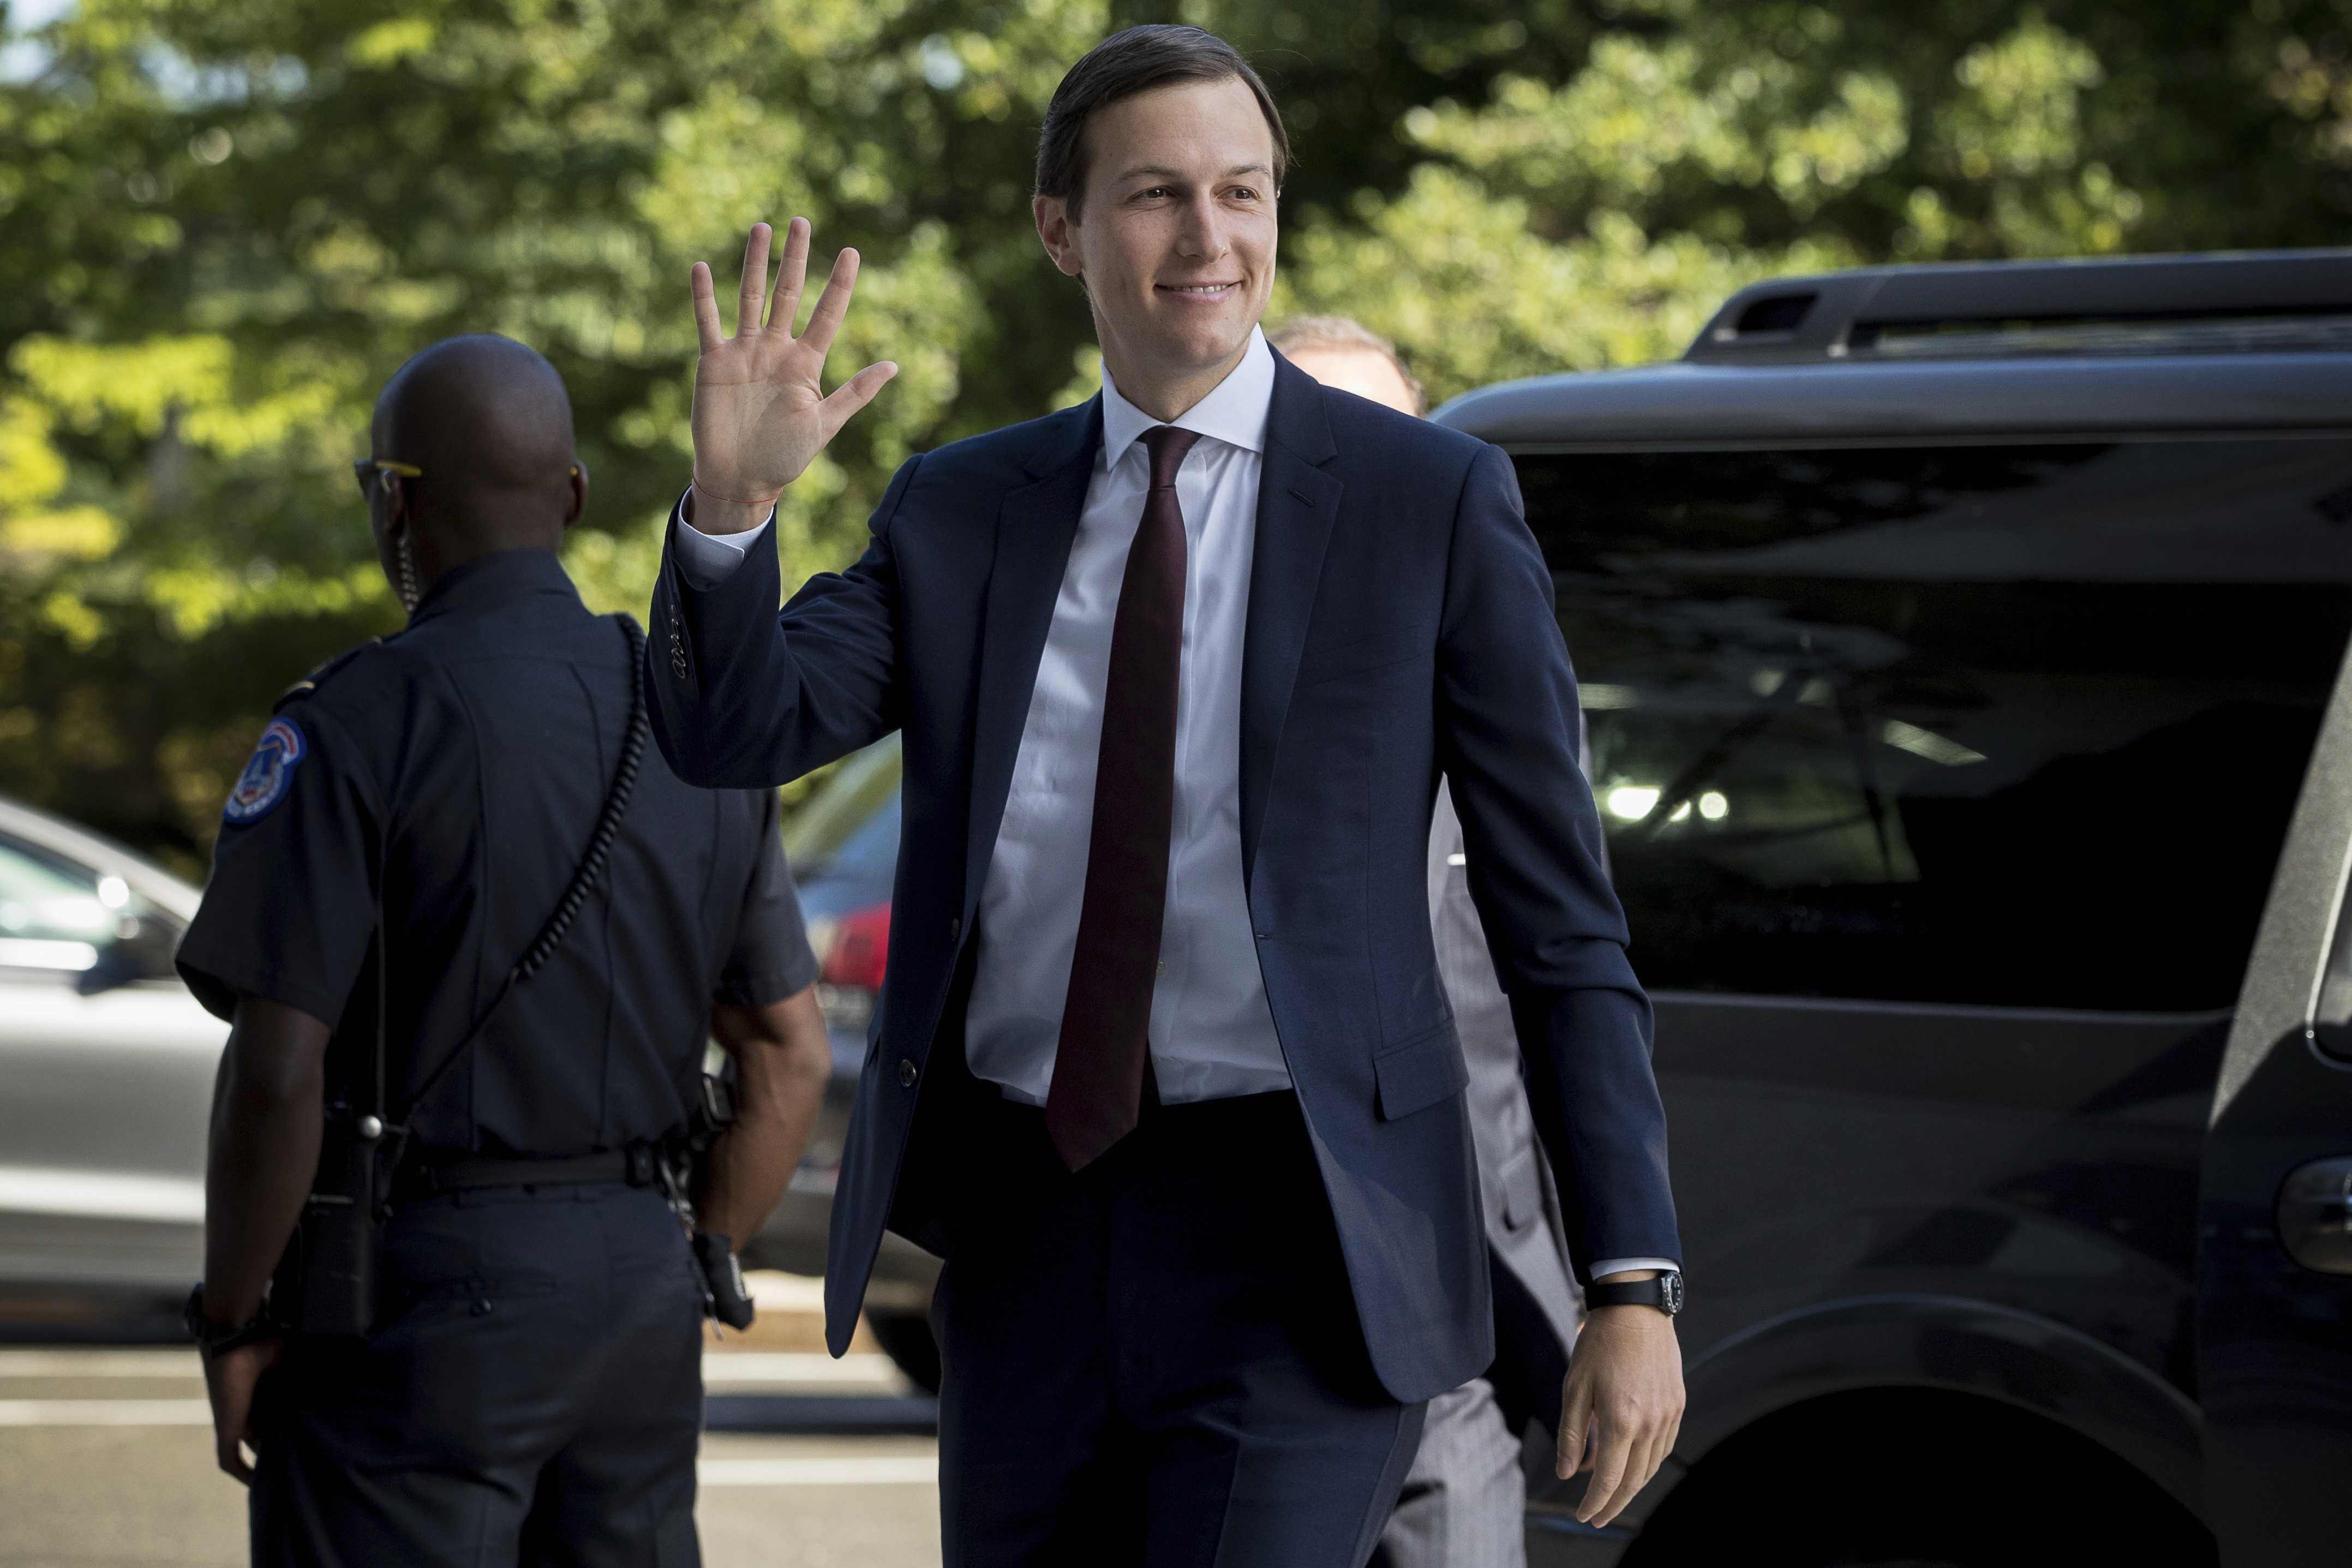 Reports: Kushner security clearance downgraded